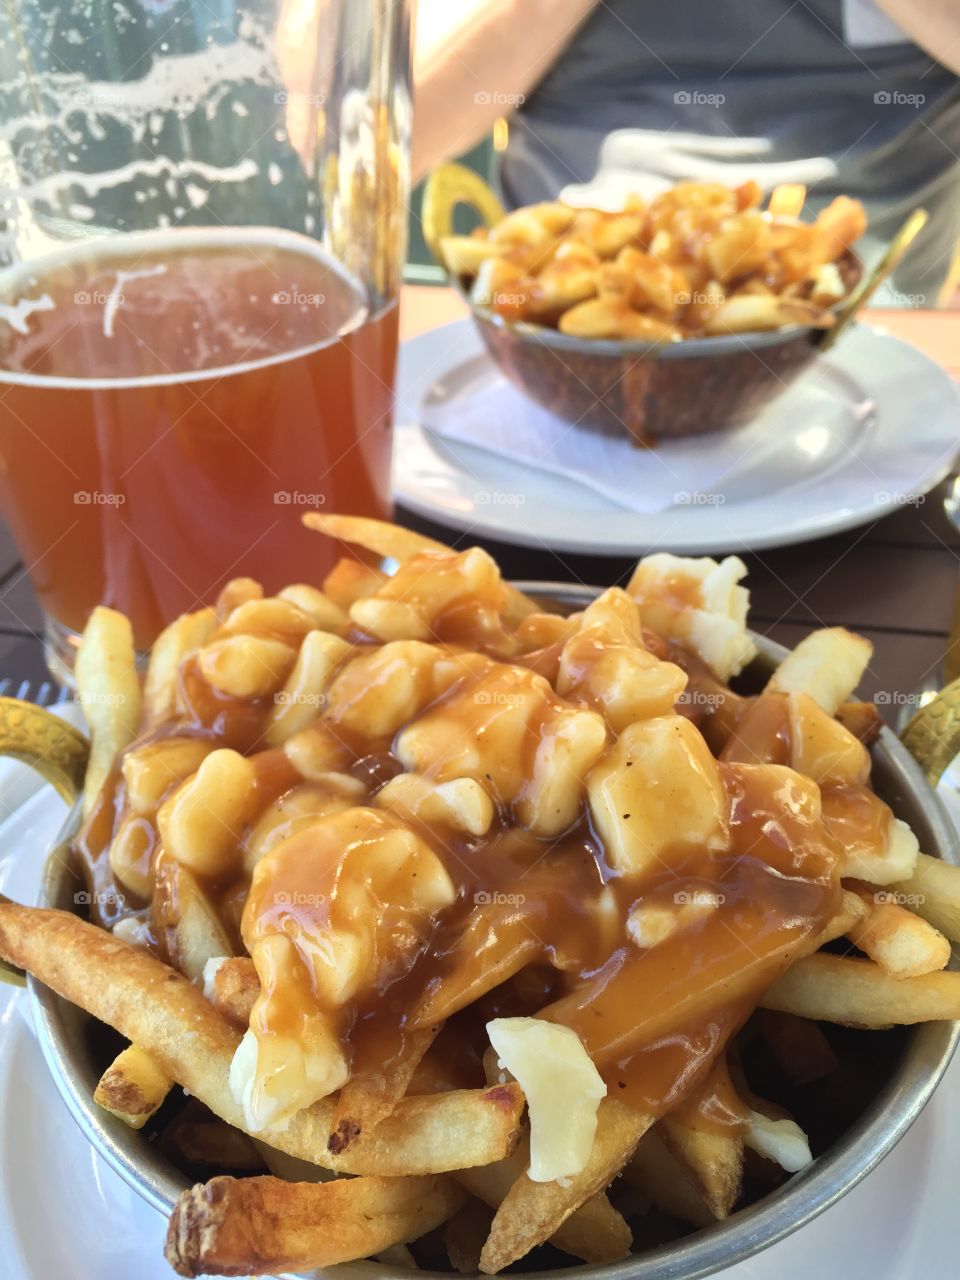 Classic poutine with beer, Quebec City